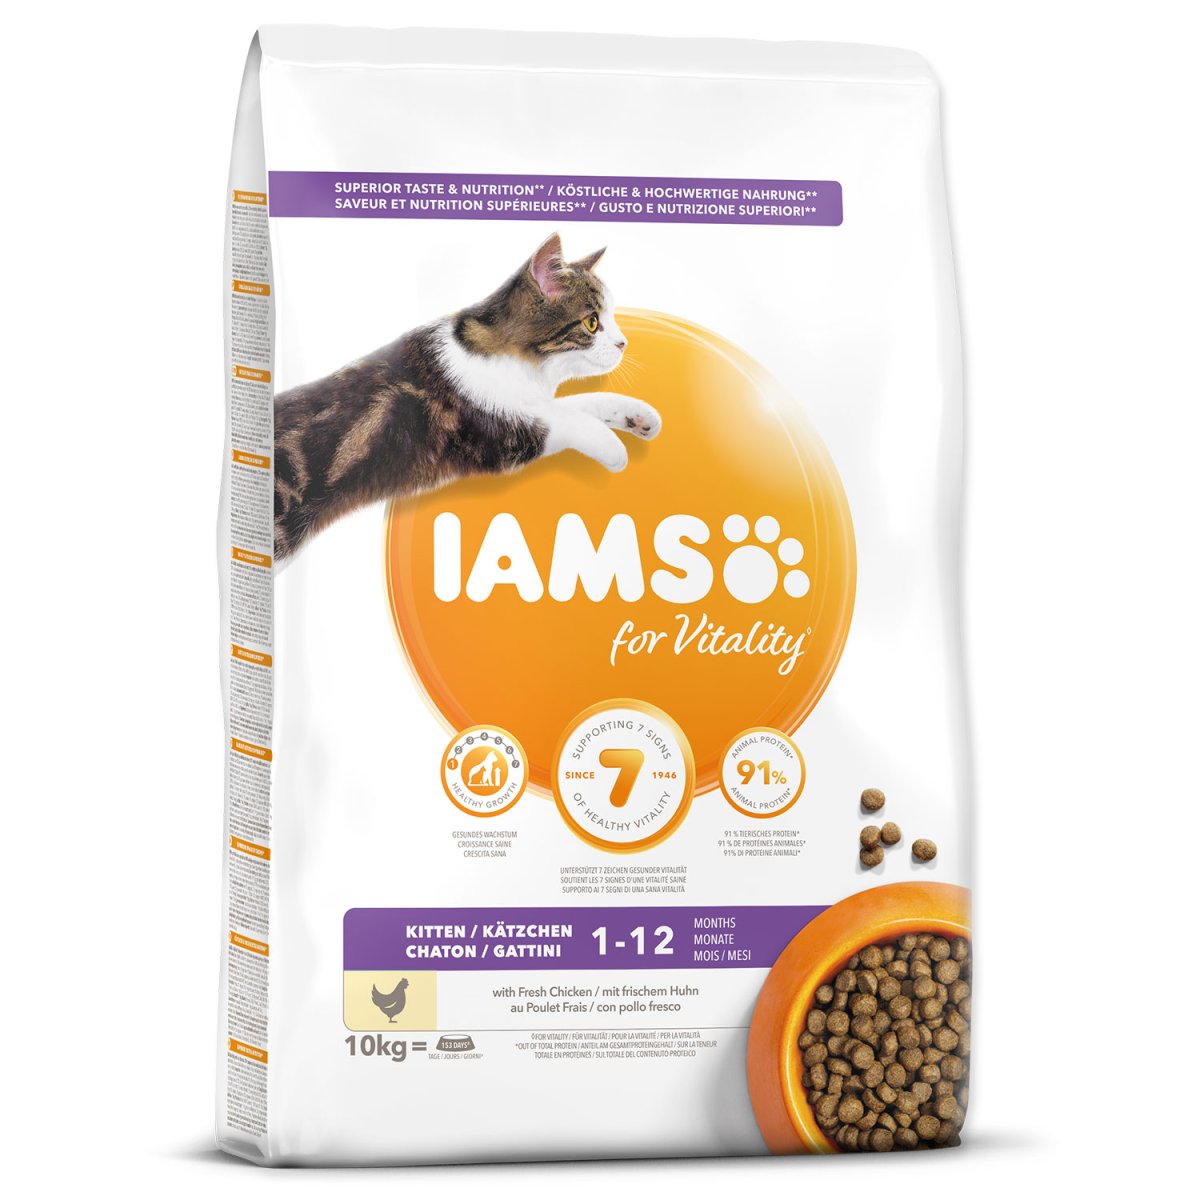 IAMS for Vitality Kitten Food with Fresh Chicken - 10 kg